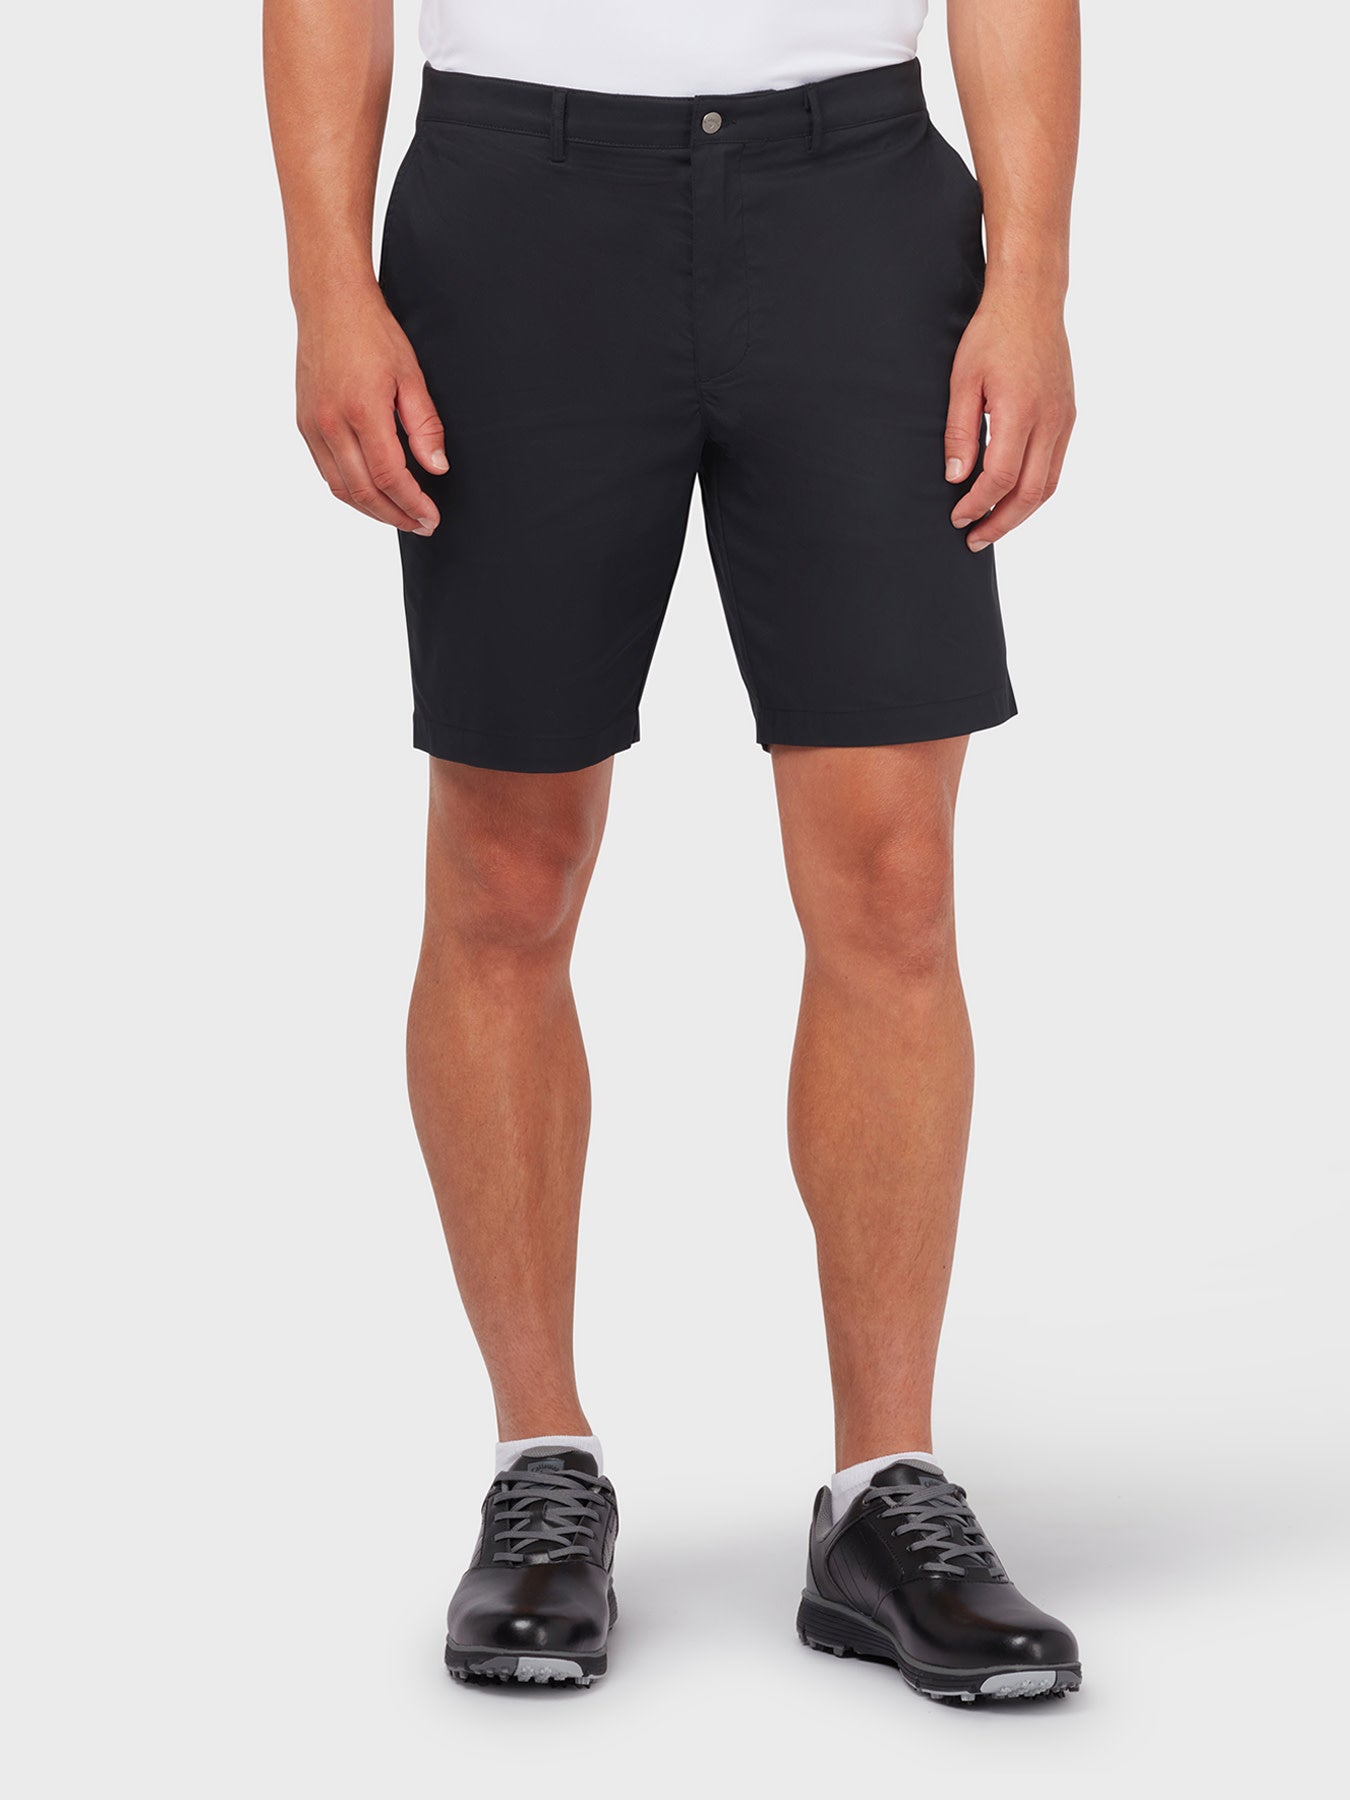 View X Series Flat Fronted Short In Caviar Caviar 30 information